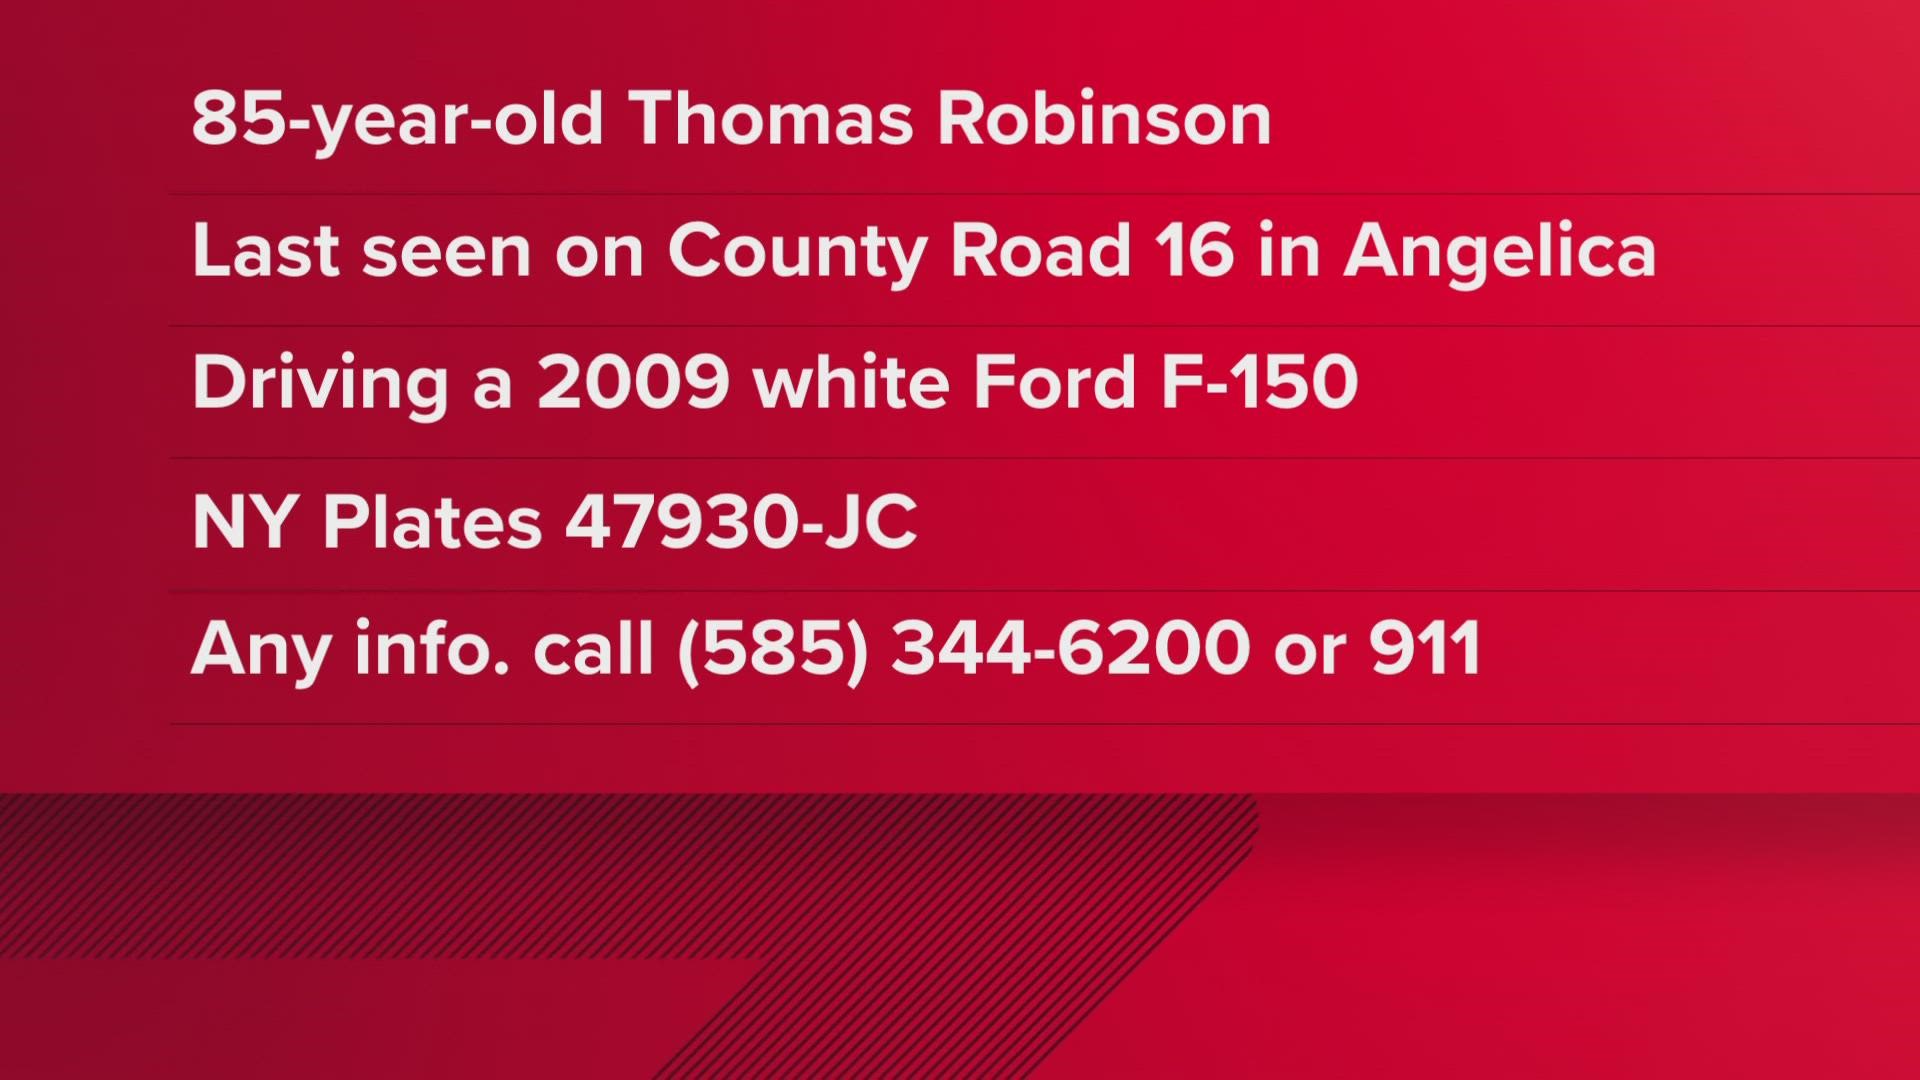 Thomas Robinson, 85, is a missing vulnerable adult with dementia who might also be in need of medical attention, according to New York State Police.